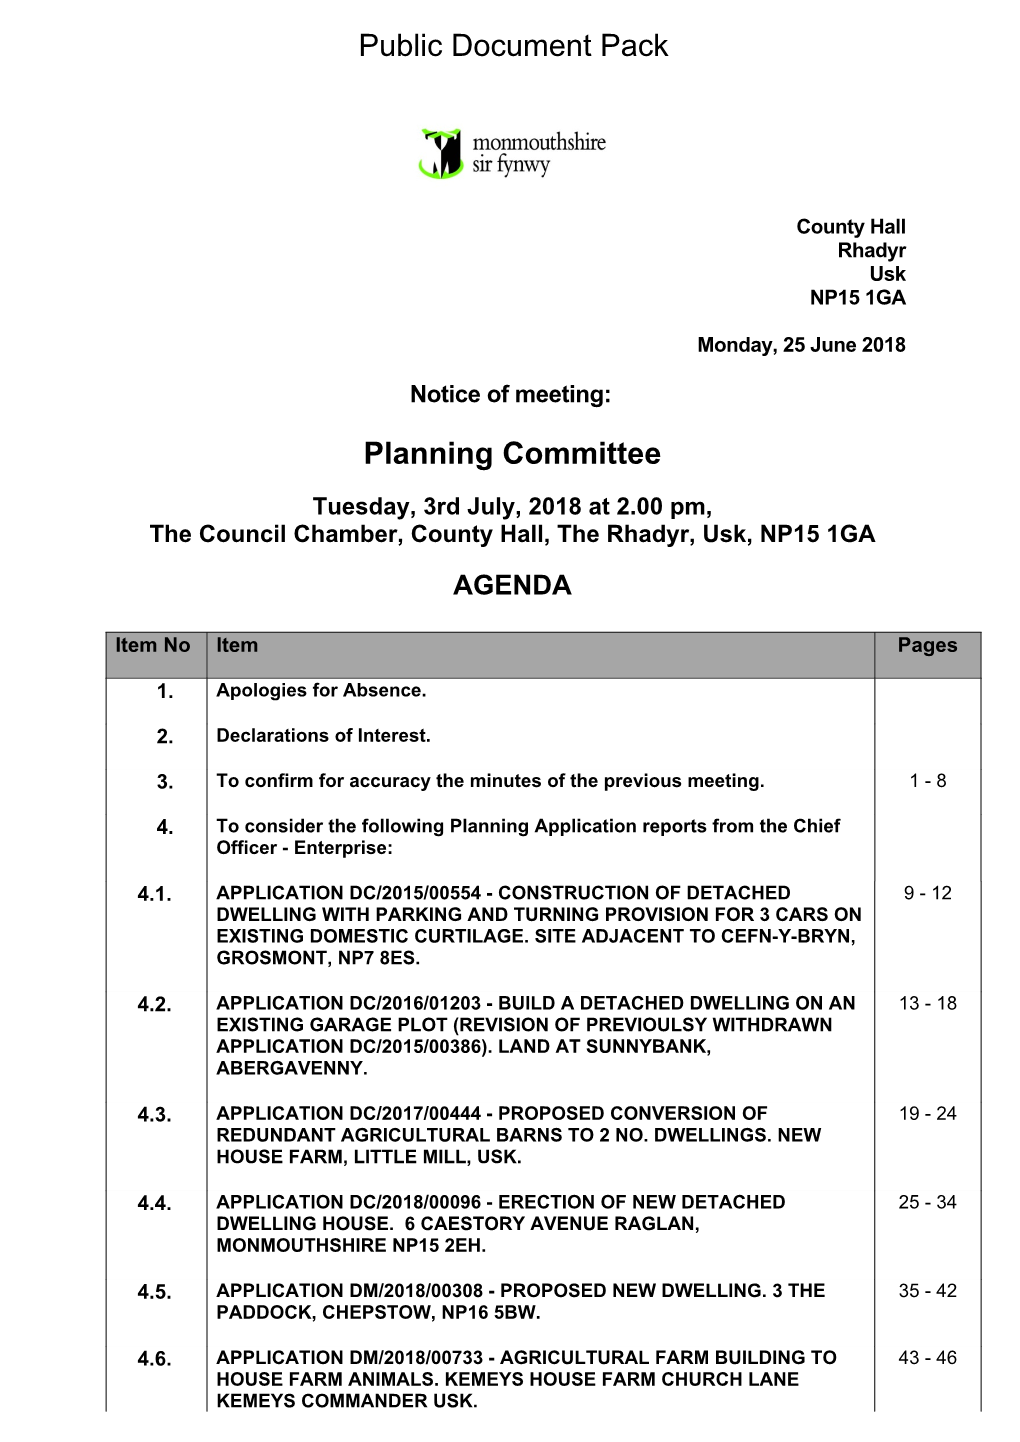 (Public Pack)Agenda Document for Planning Committee, 03/07/2018